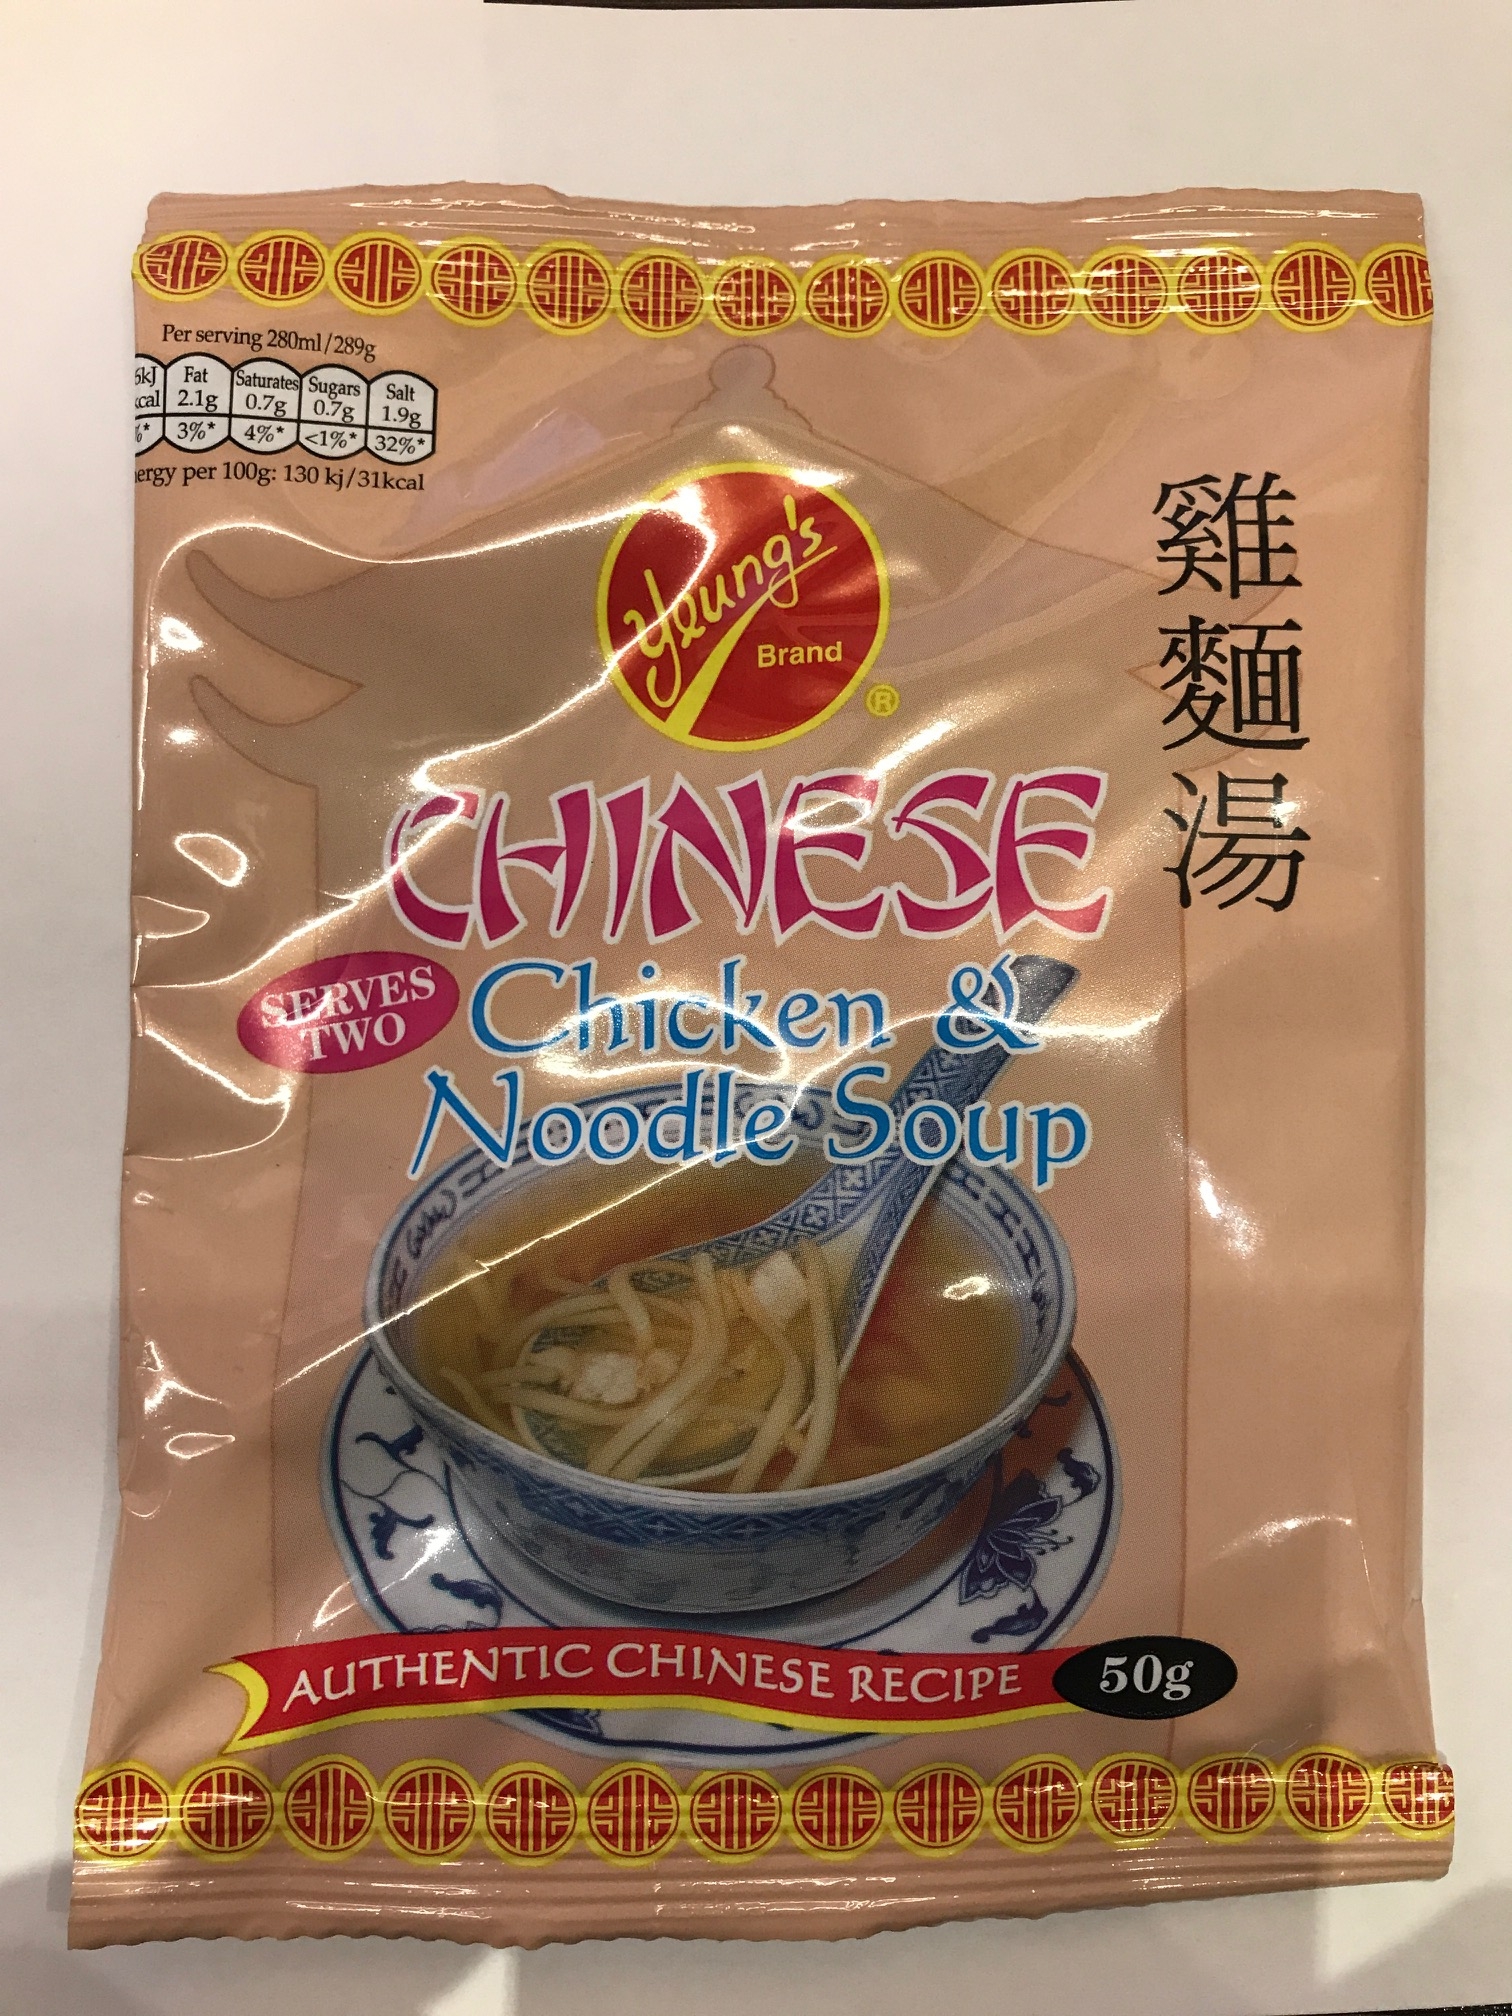 Yeung's Chinese Chicken Noodle Soup Mix (Serves 2) - 50g (12 Packs)